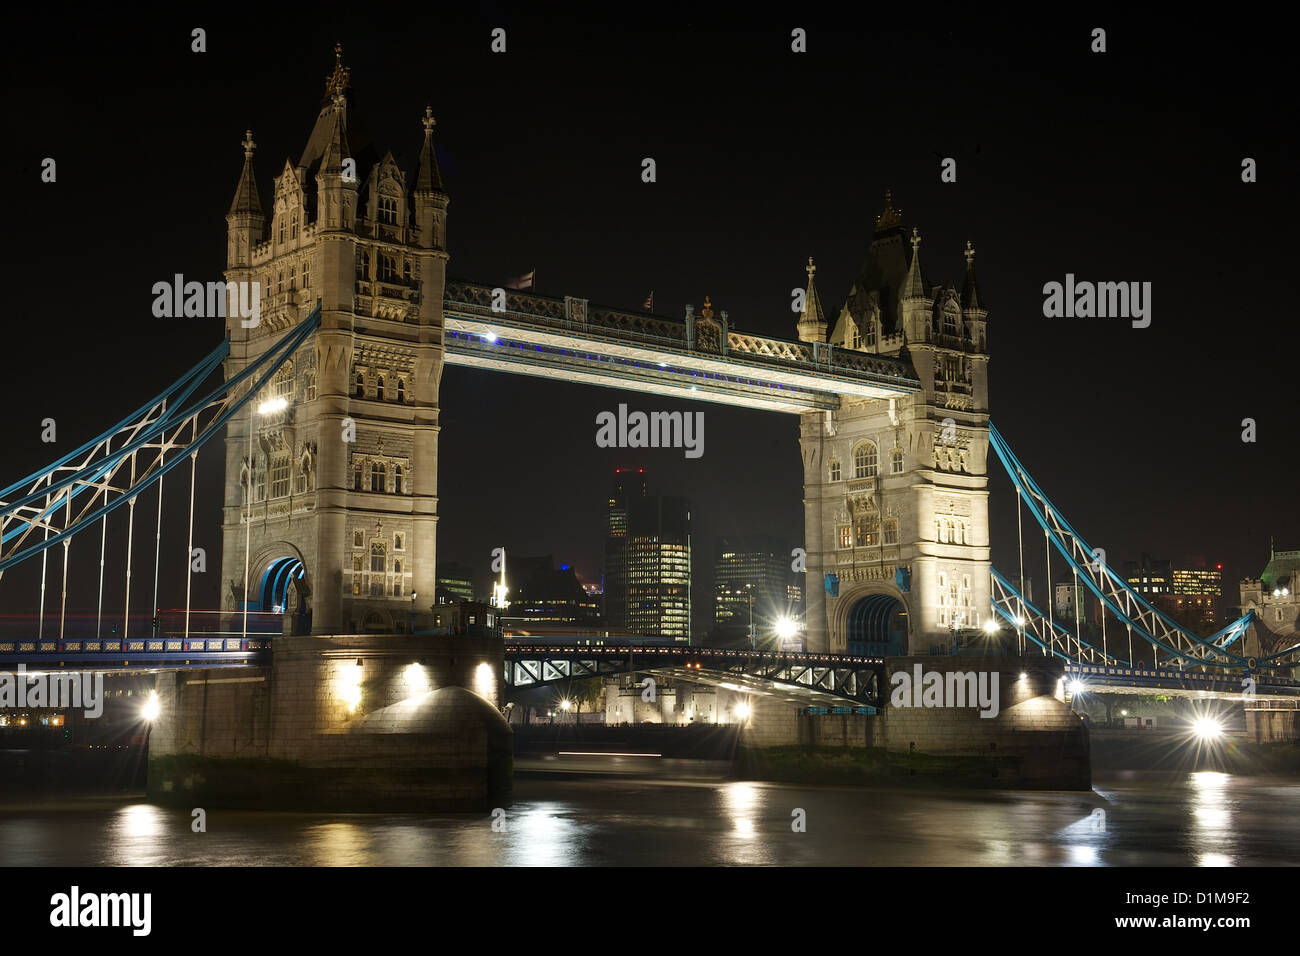 Tower Bridge by night, London, UK Banque D'Images